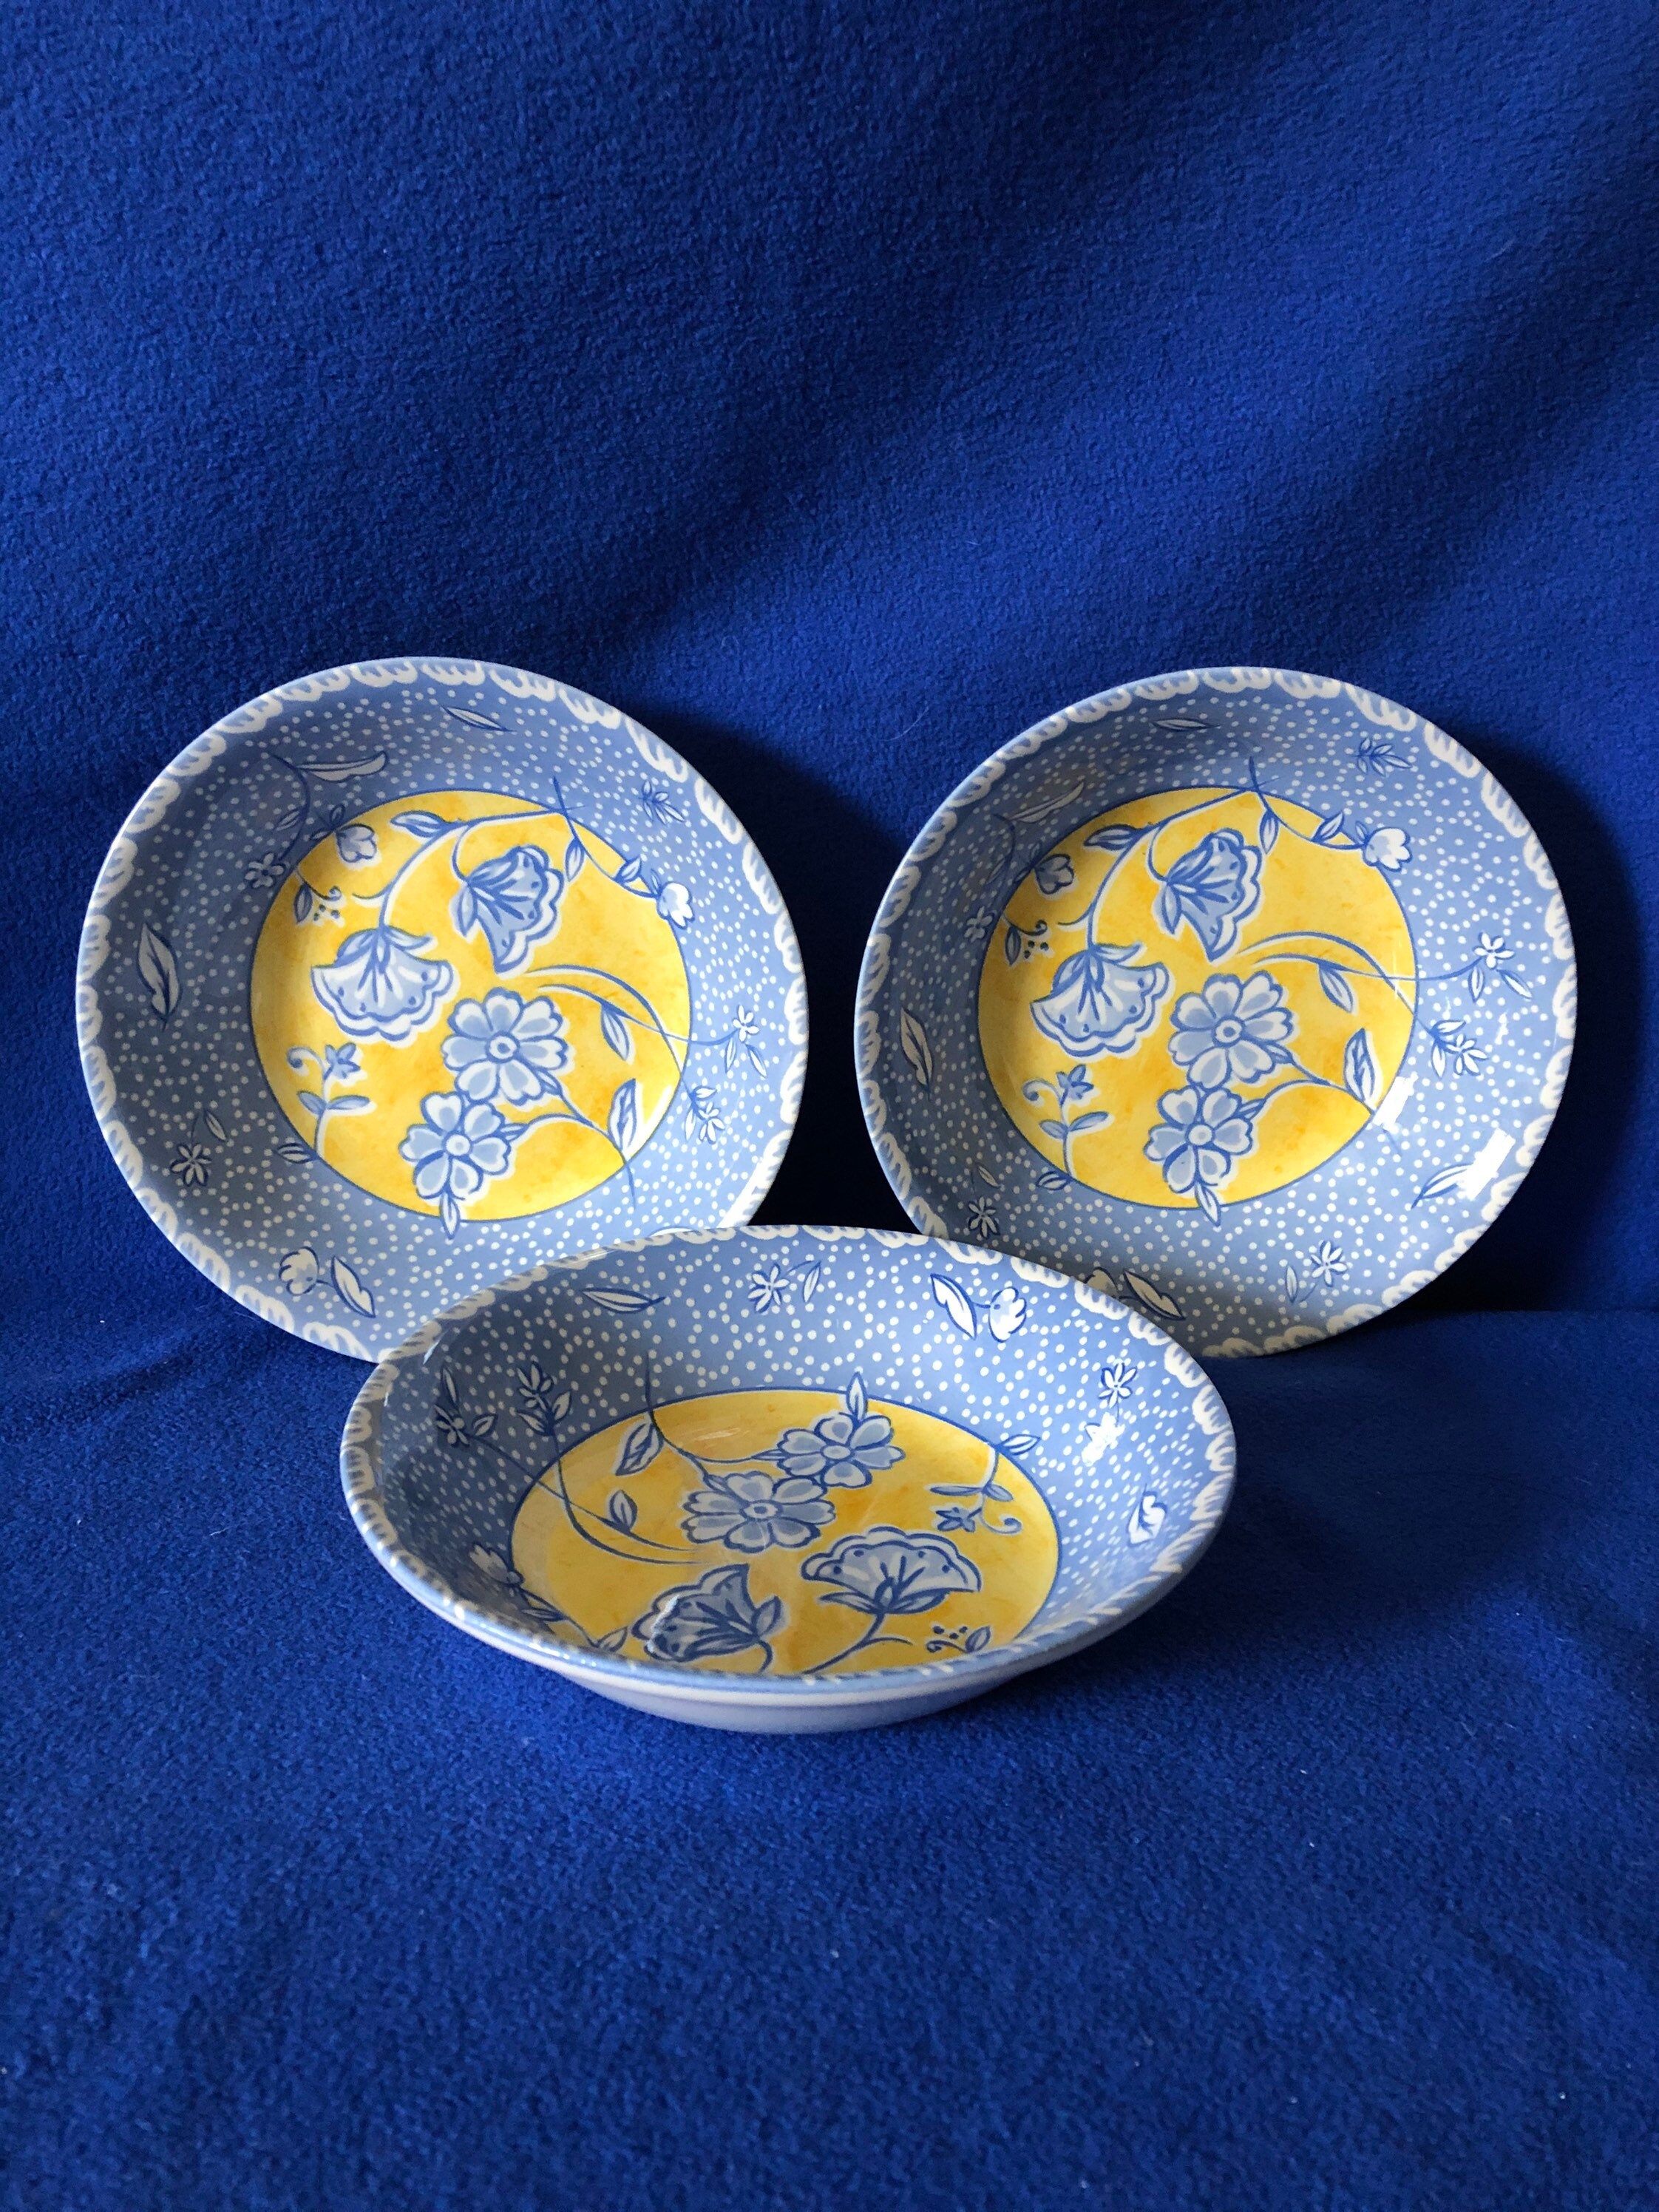 Royal Stafford earthenware cereal bowls Blue and yellow. Set of 3 7\u201d diameter